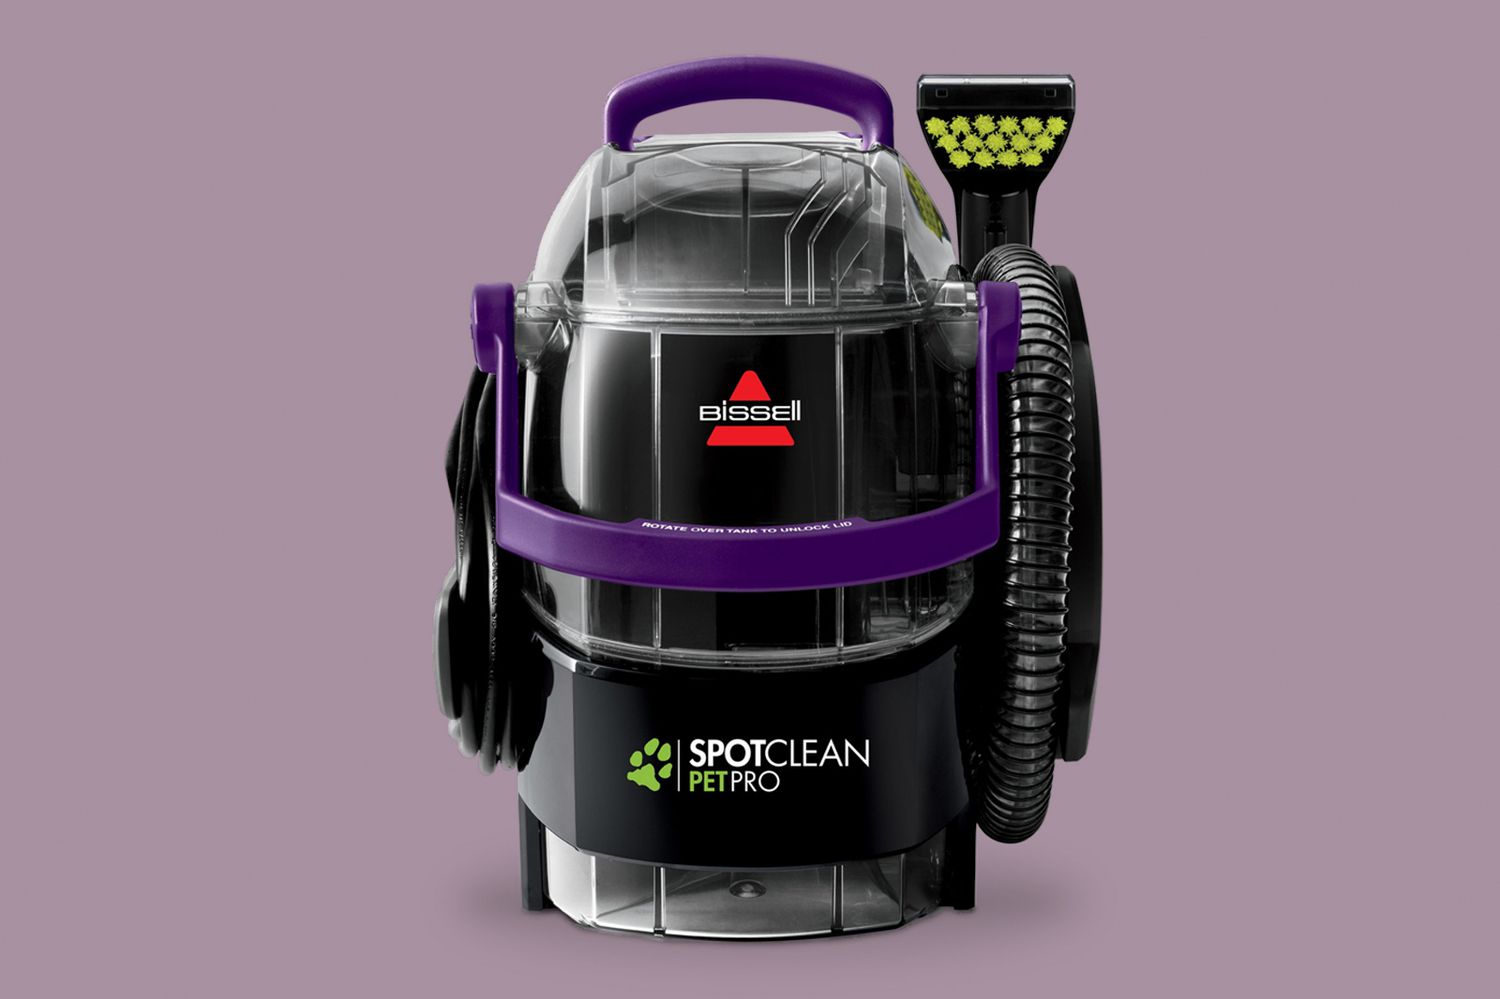 BISSELL carpet cleaner on purple background